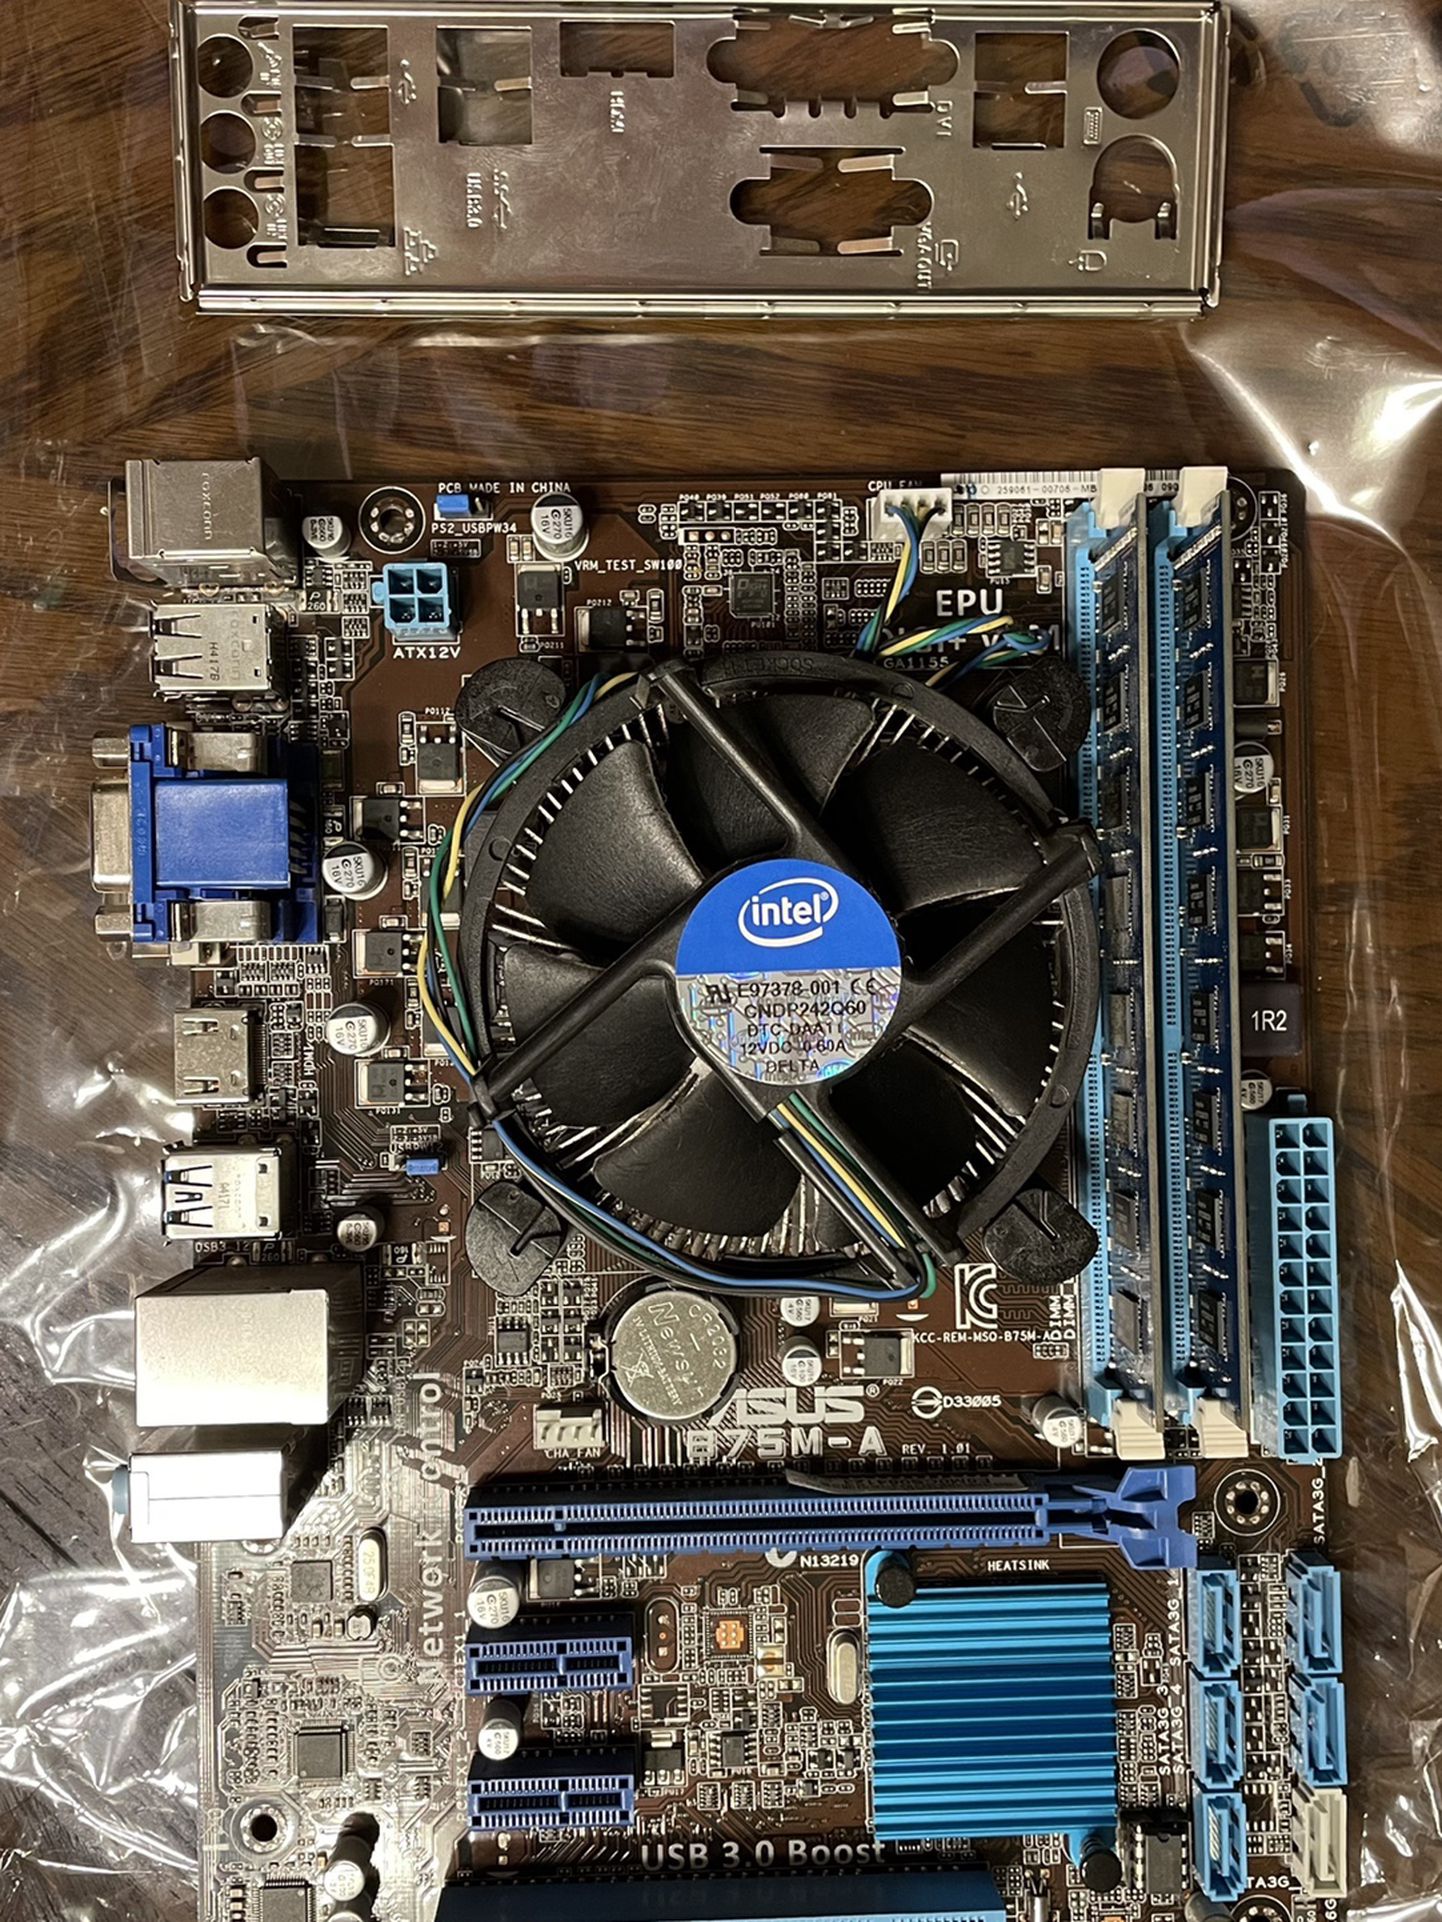 Intel i5-2500, Motherboard And 8GB Of RAM